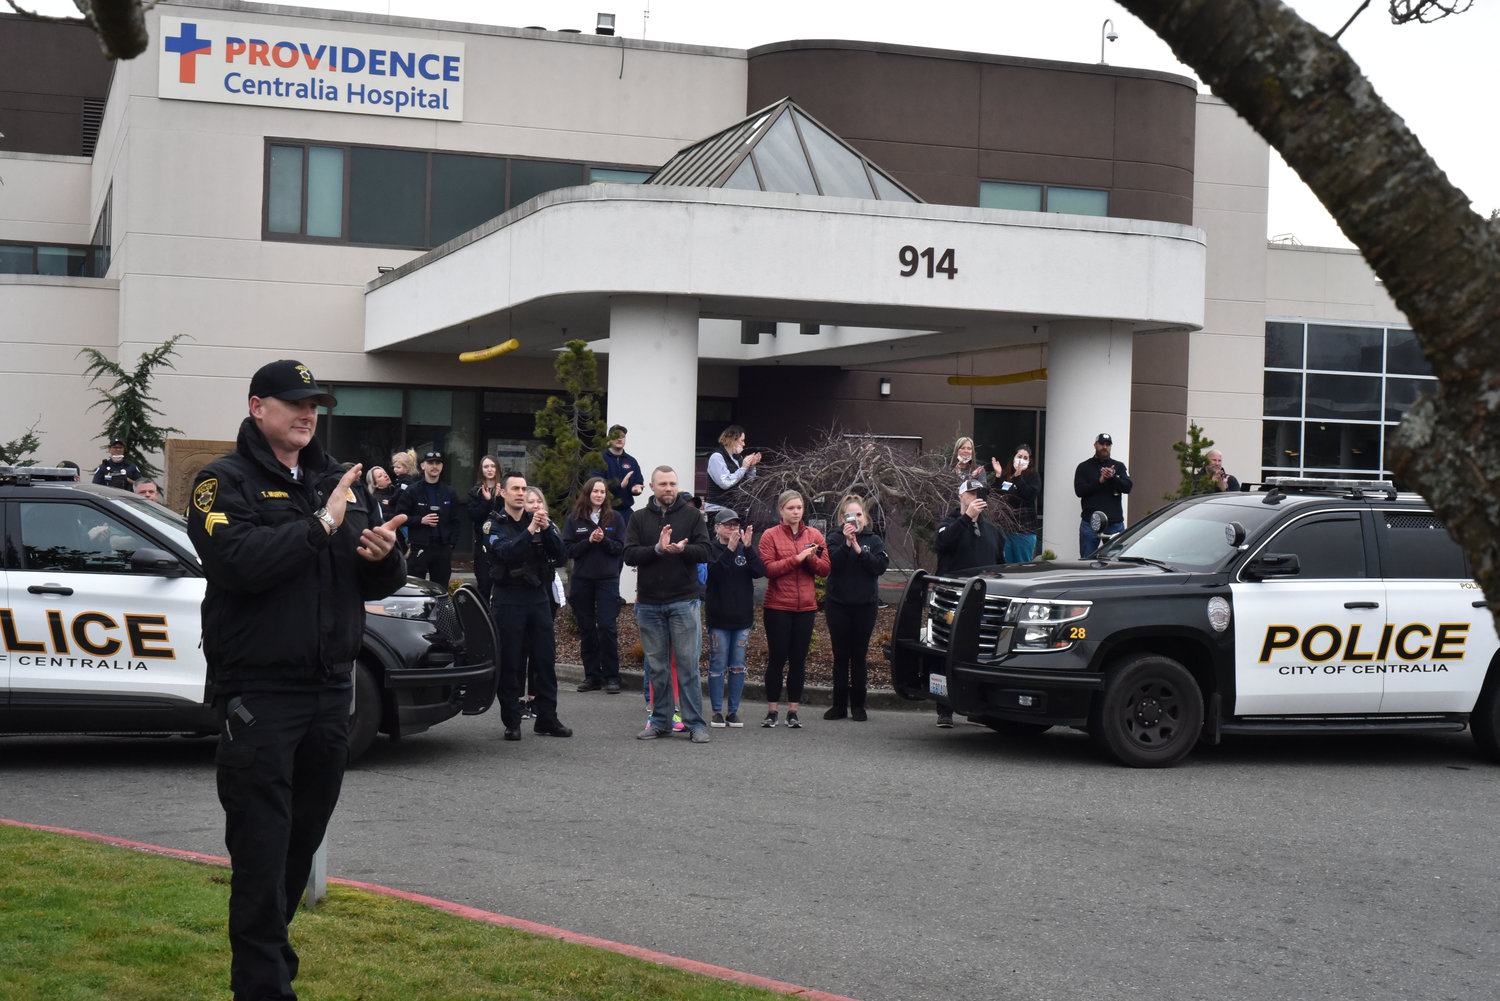 Flanked by lines of medical staff, law enforcement and other emergency responders, officer Stephen Summers walked out of the west entrance of the hospital to heavy applause. 